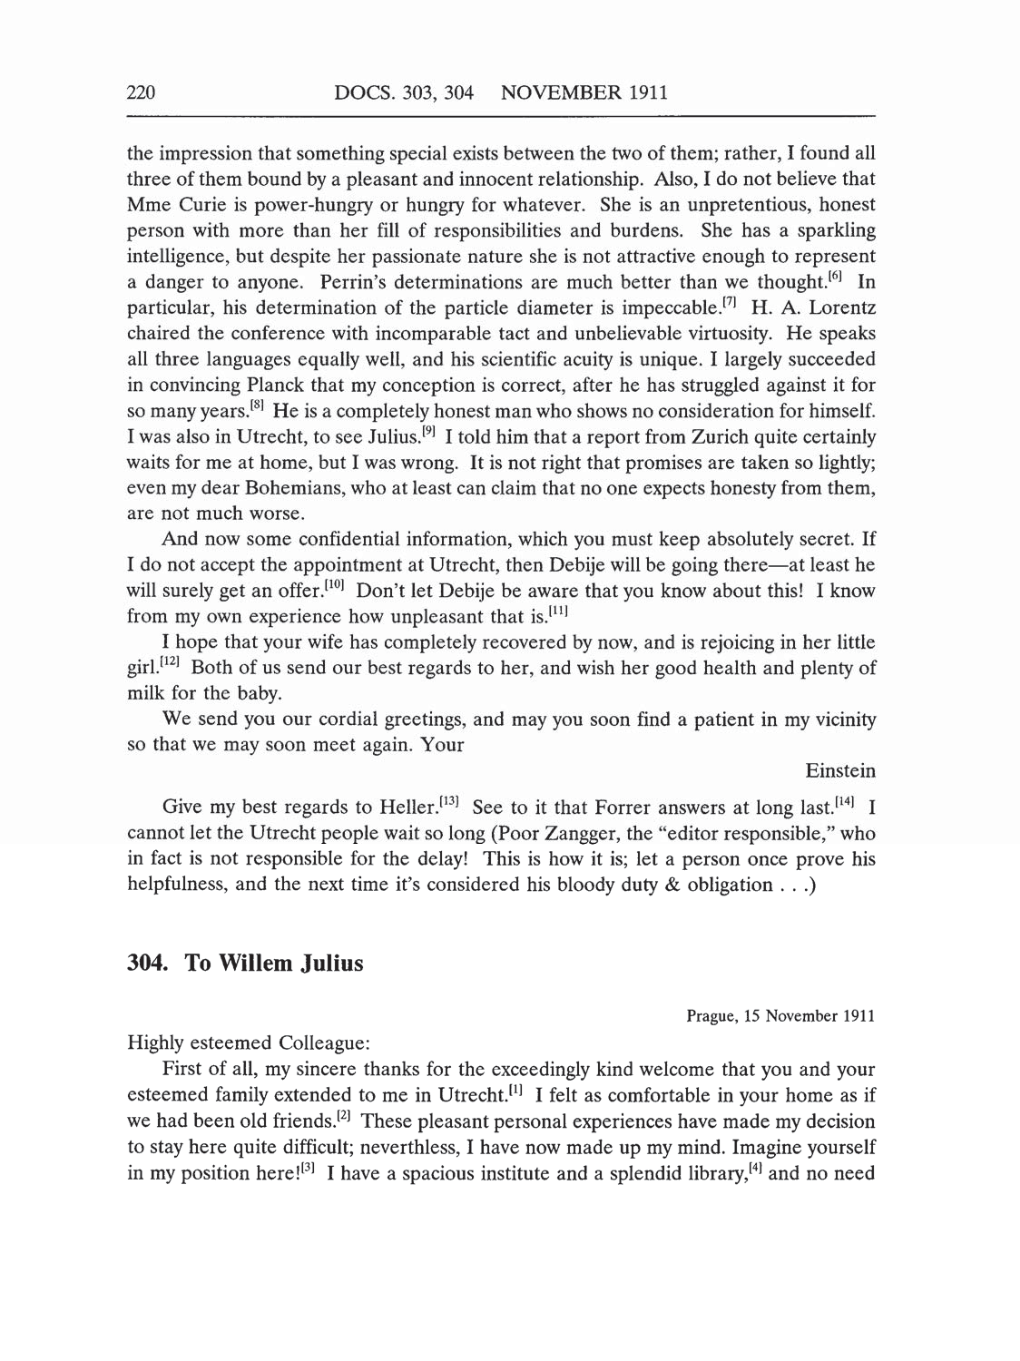 Volume 5: The Swiss Years: Correspondence, 1902-1914 (English translation supplement) page 220